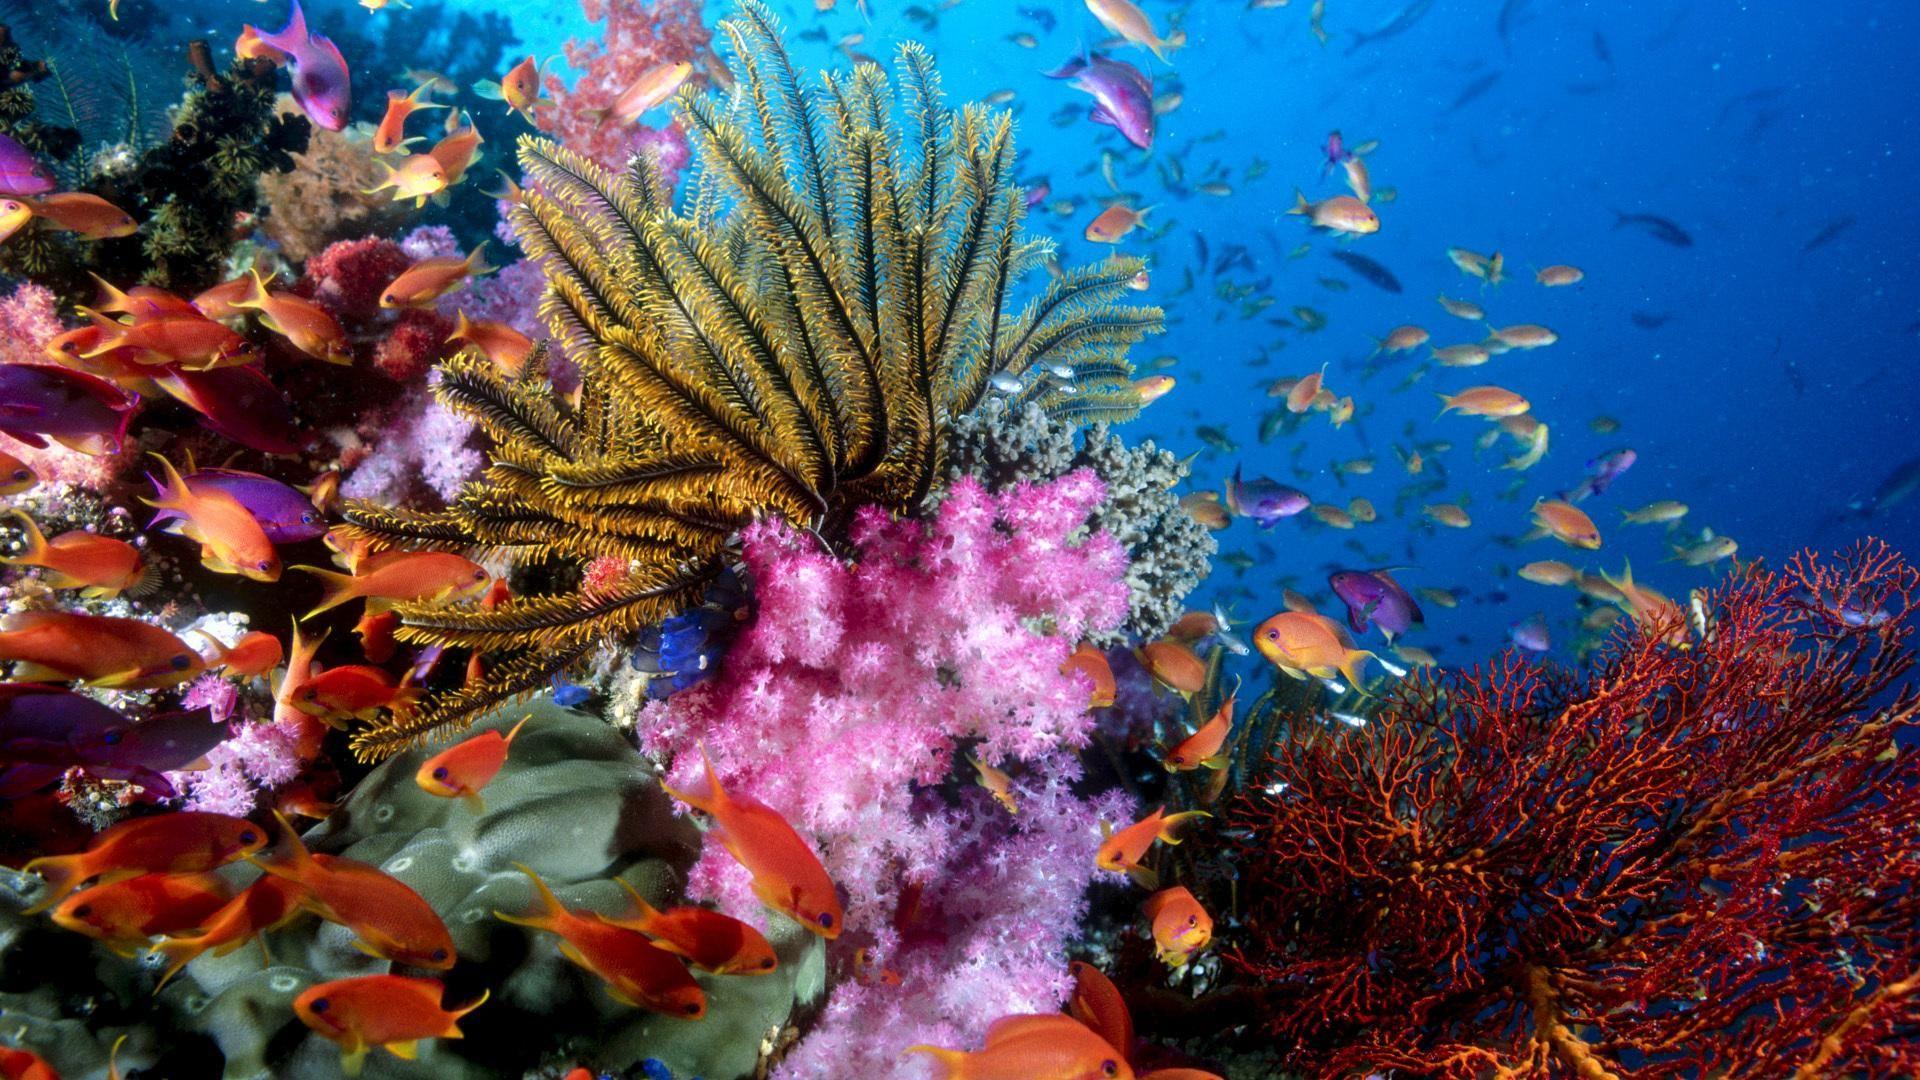 Colorful Coral Reef Wallpaper Mobile #nVF. Earth